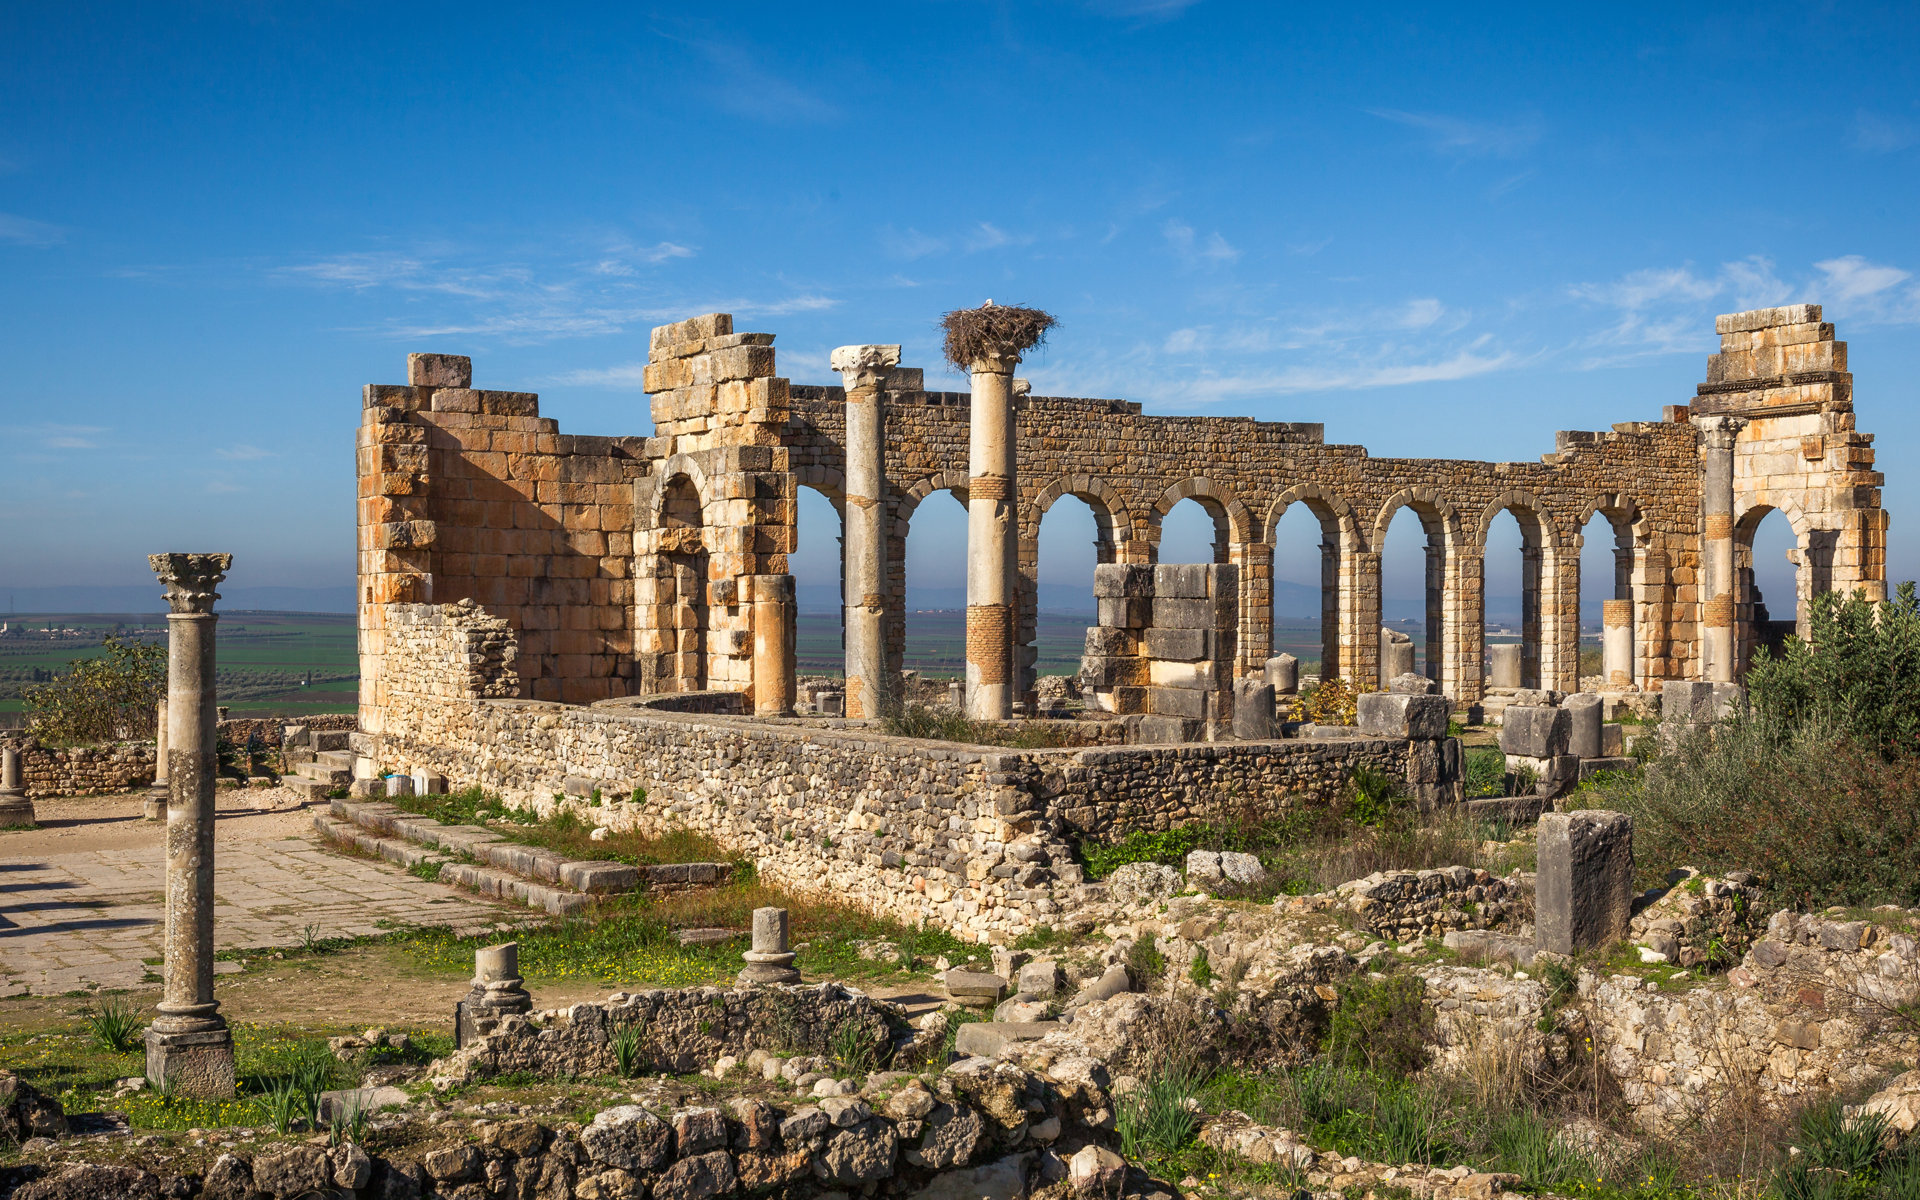 Full day trip from Fes to Meknes and Volubilis